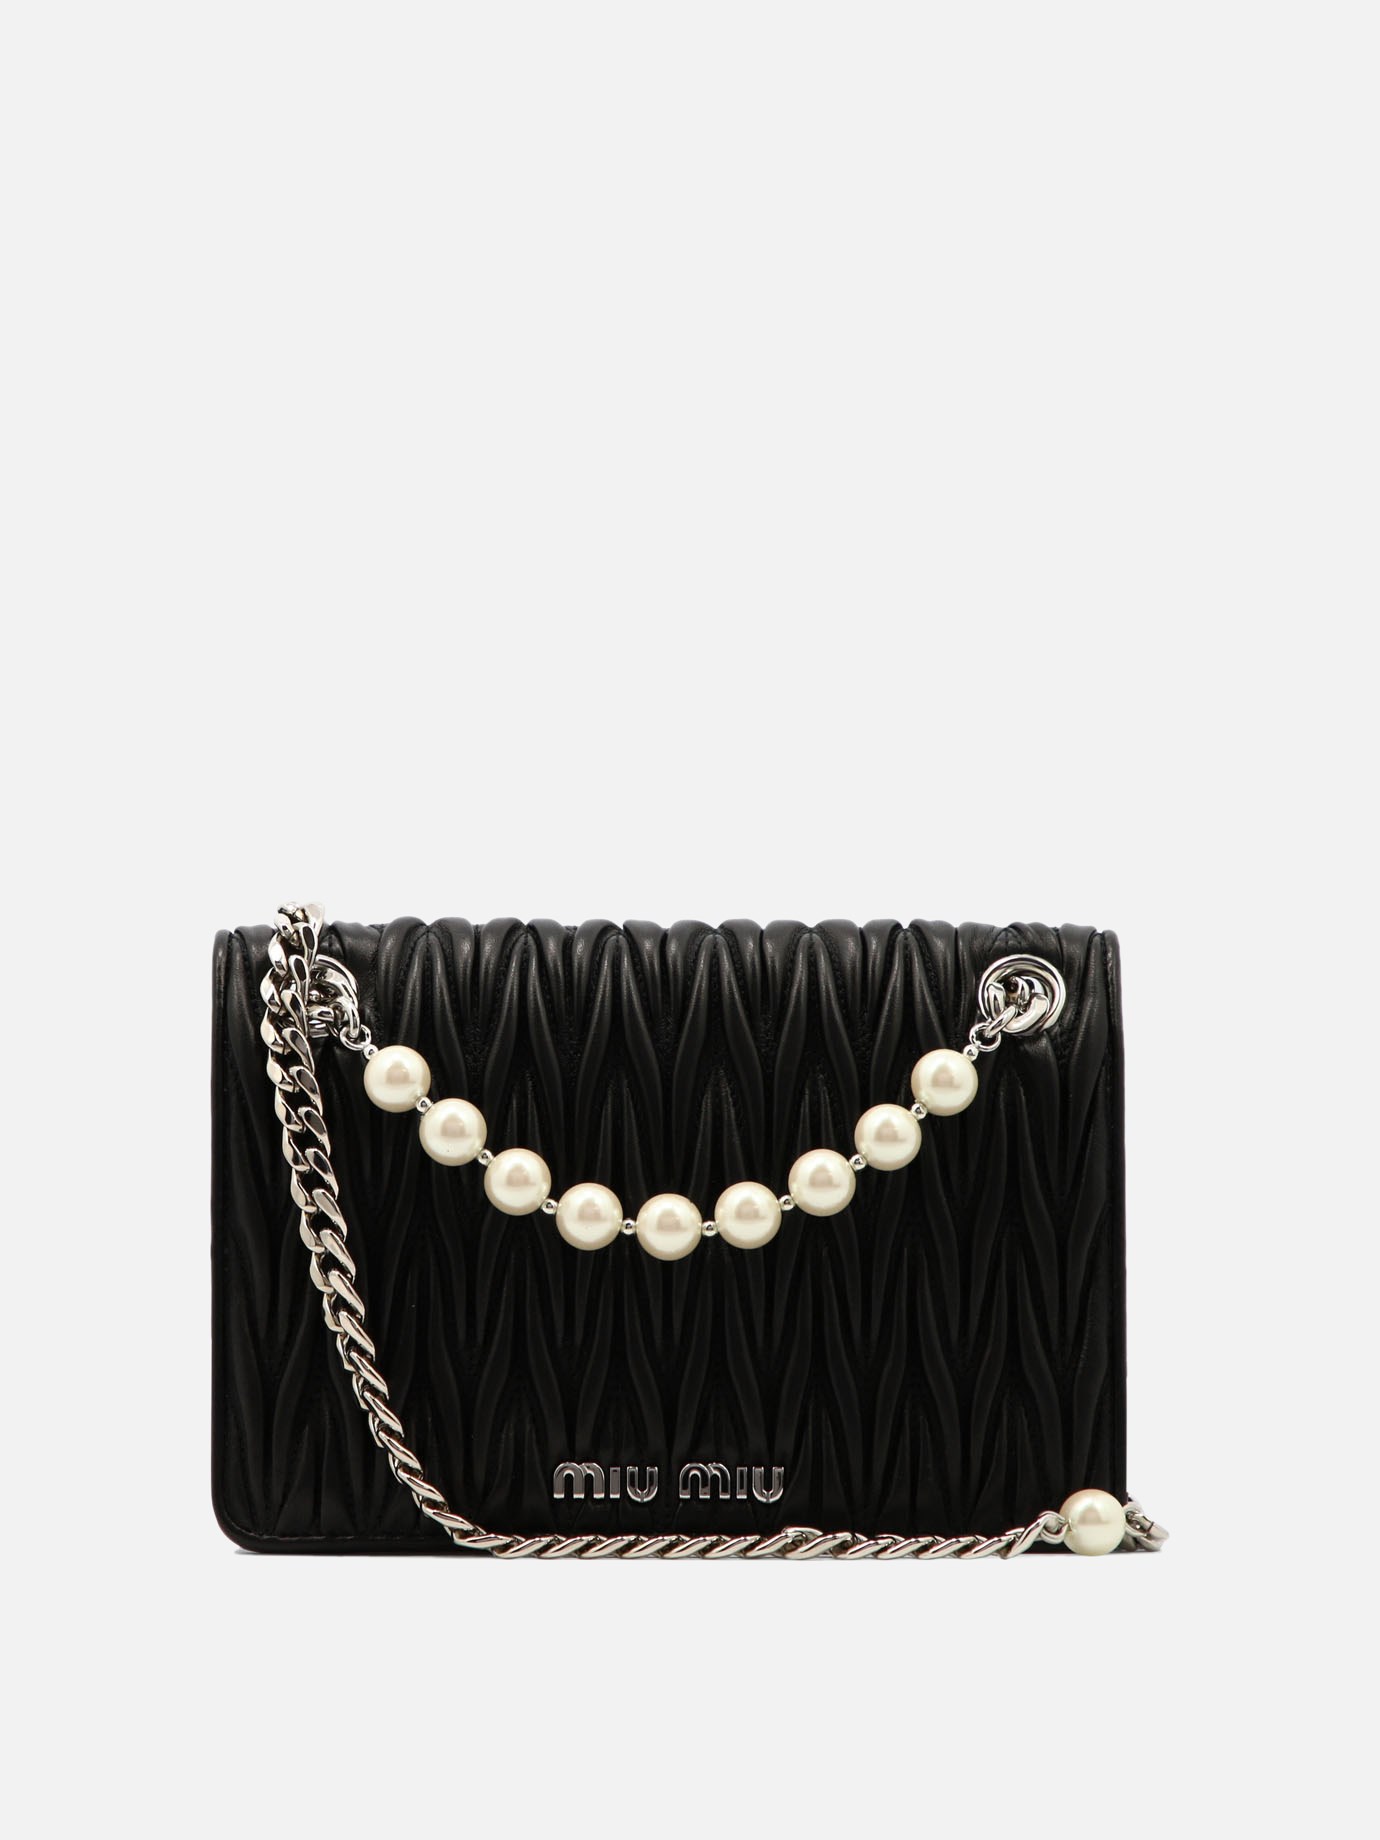 Crossbody bag in quilted nappa leather by Miu Miu